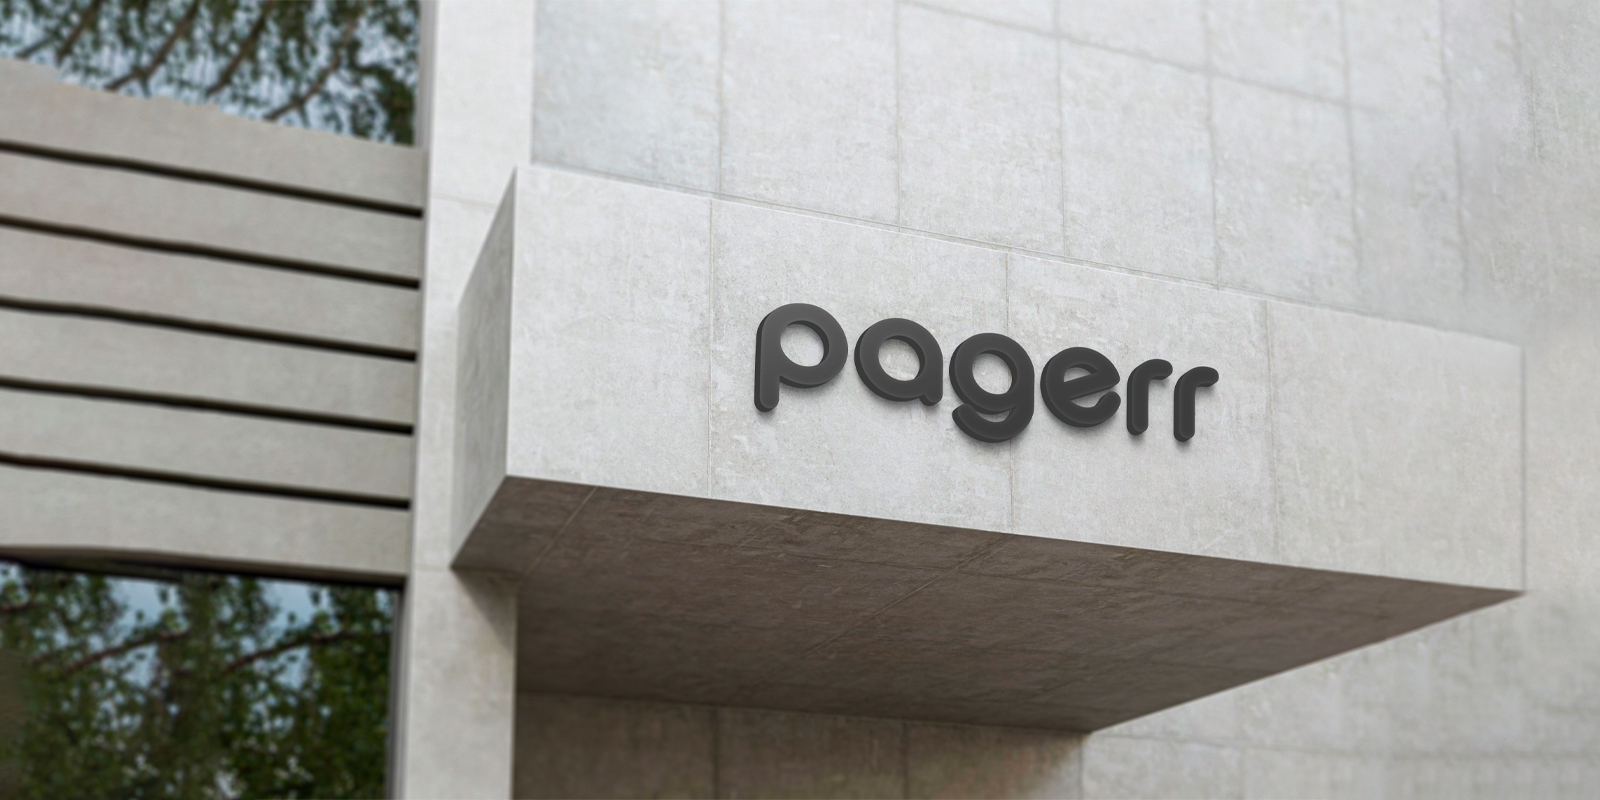 Logo signs in Valencia - Print with Pagerr